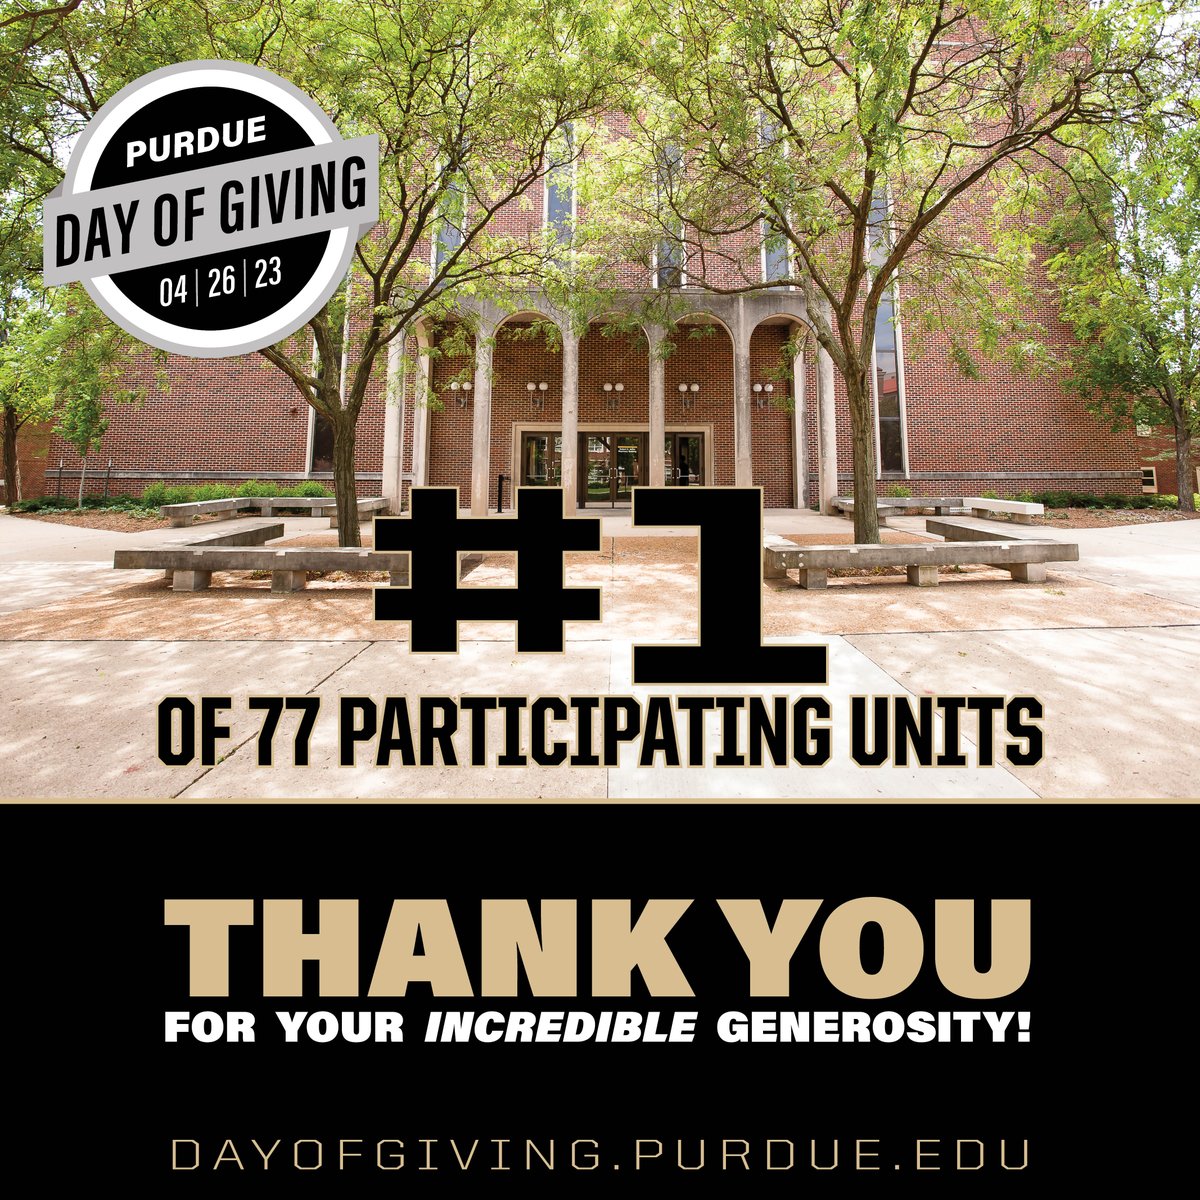 The Purdue College of Pharmacy is #1 again! Alumni, faculty, staff, retirees, students, parents, and friends: You are incredible! Thank you for powering Pharmacy’s #NextGiantLeap this #PurdueDayofGiving. We are ever grateful. #PurdueRx #pharmacysgiantleap